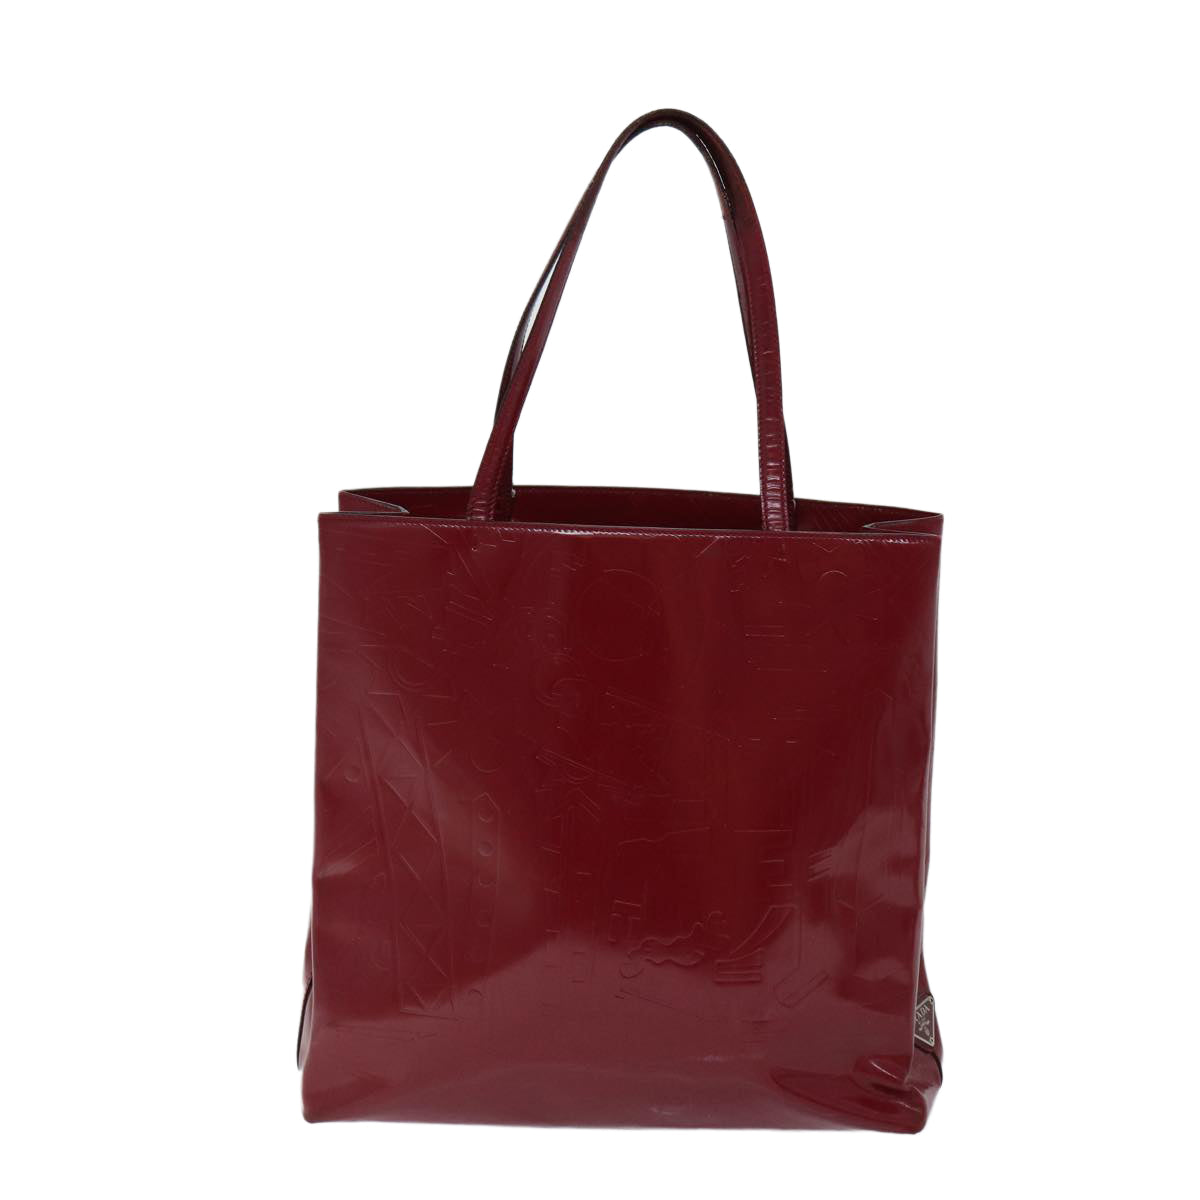 PRADA Tote Bag Patent leather Red Auth bs13314 - 0